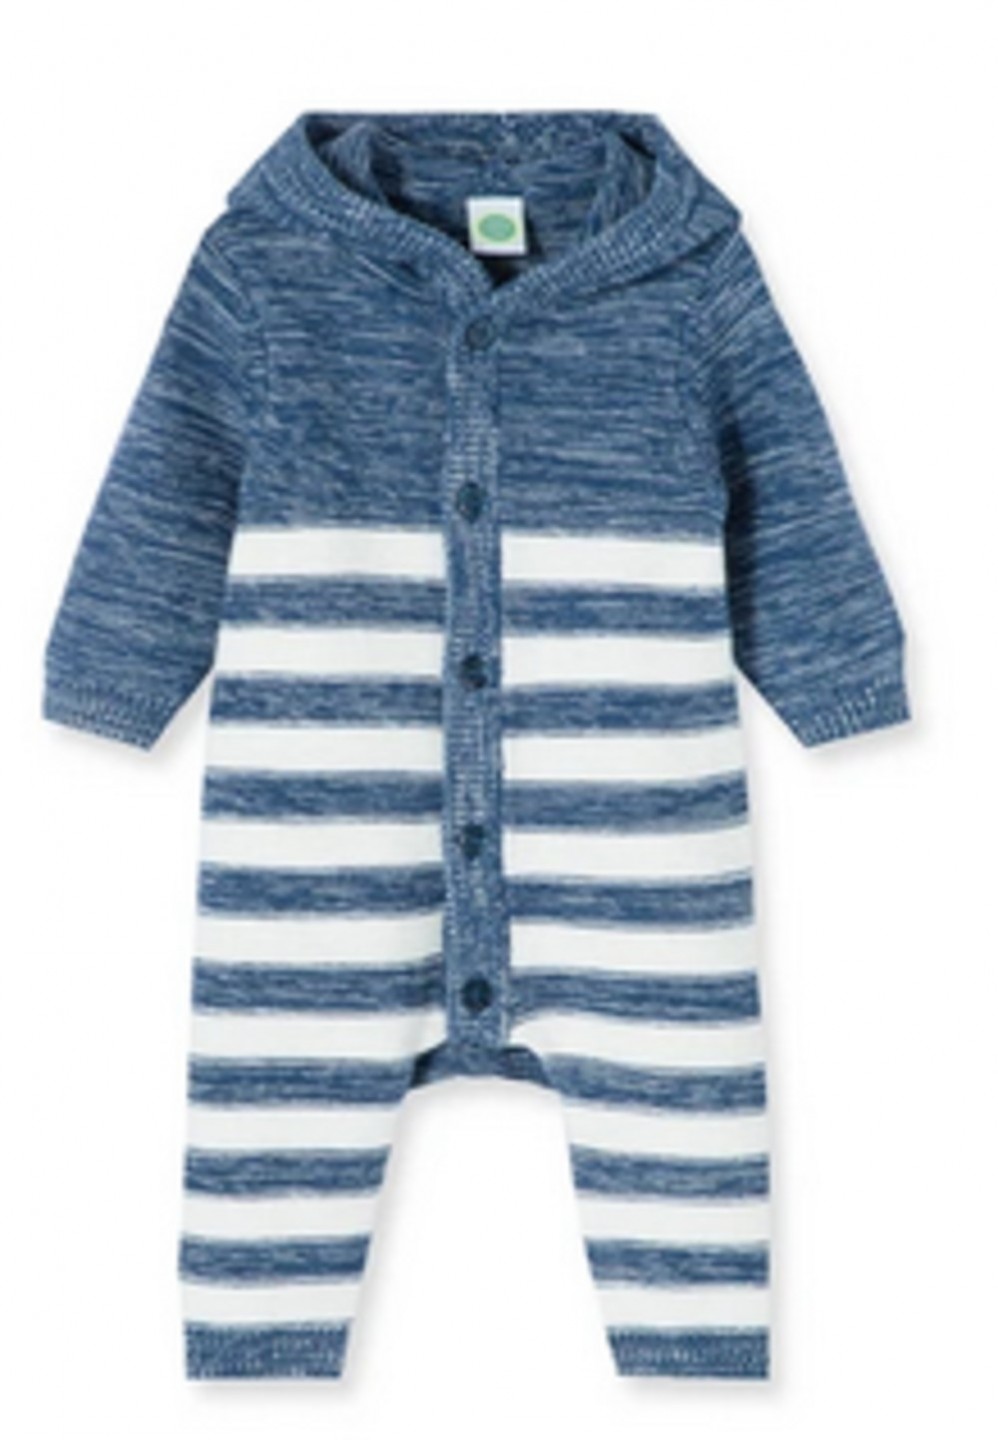 LITTLE ME L457 BABY BOYS BLUE MARLED SWEATER COVERALLS